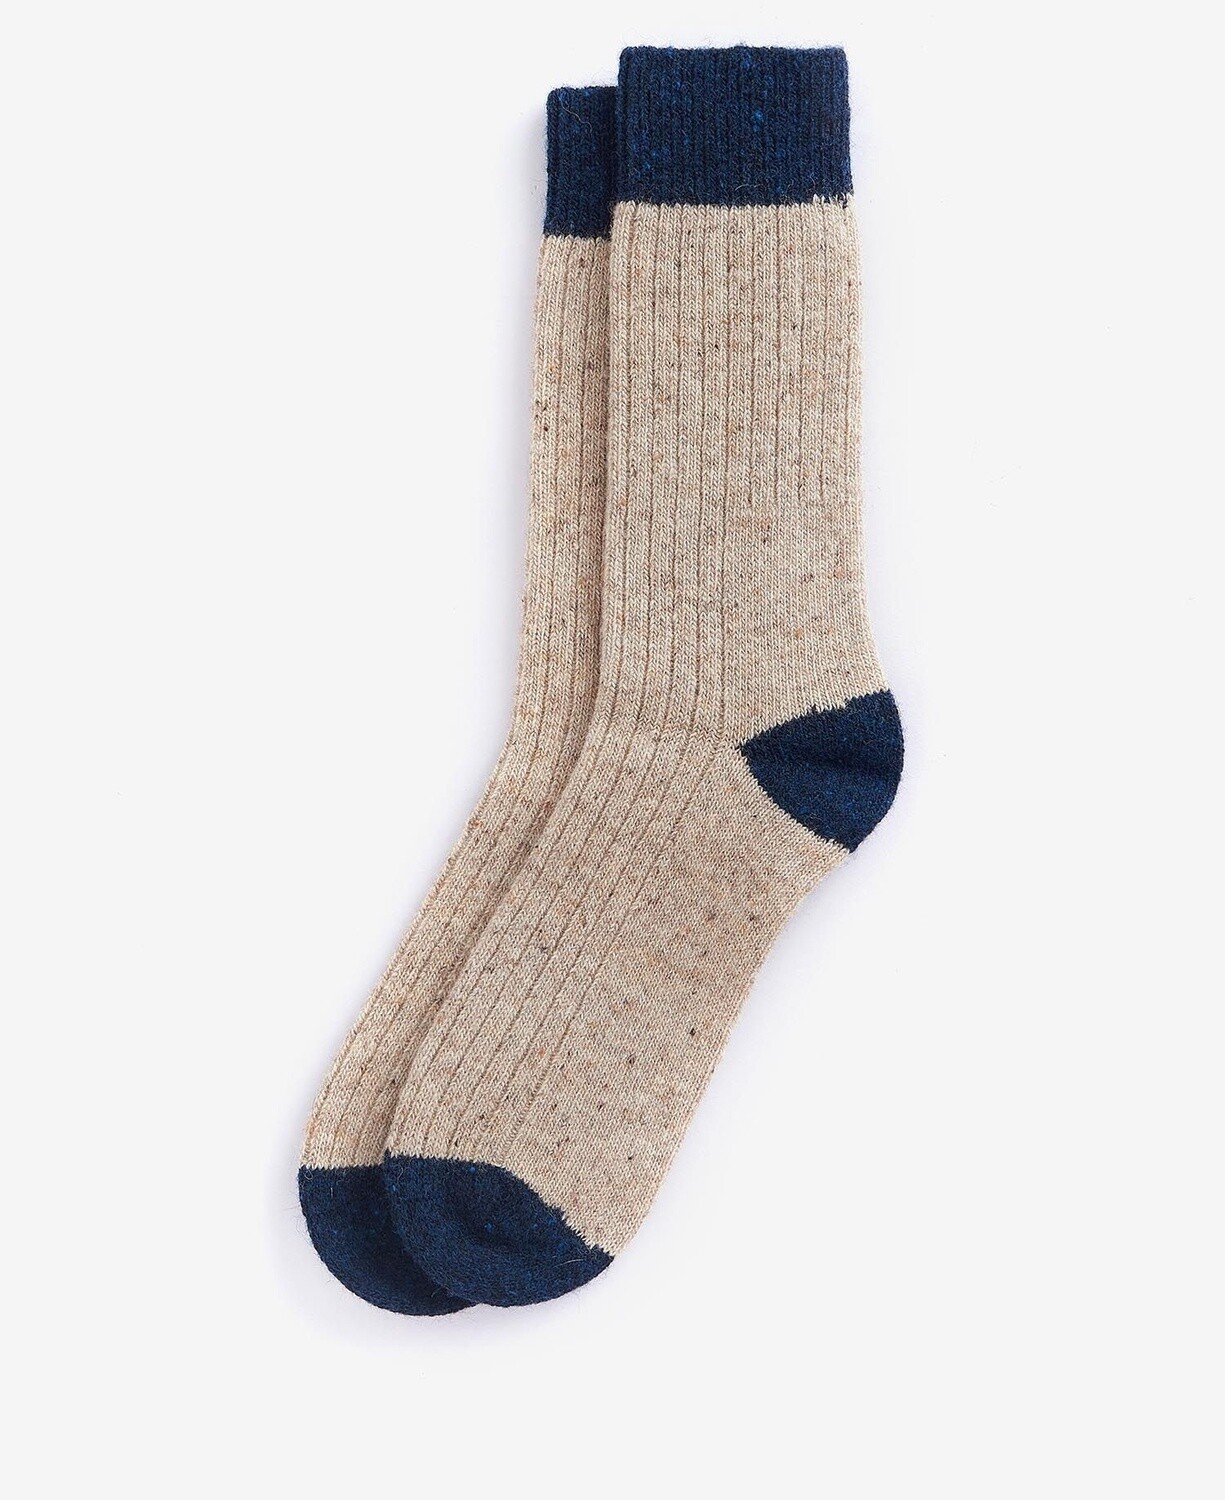 Barbour Houghton Socks - Stone/Navy, Size: M (8-9US)